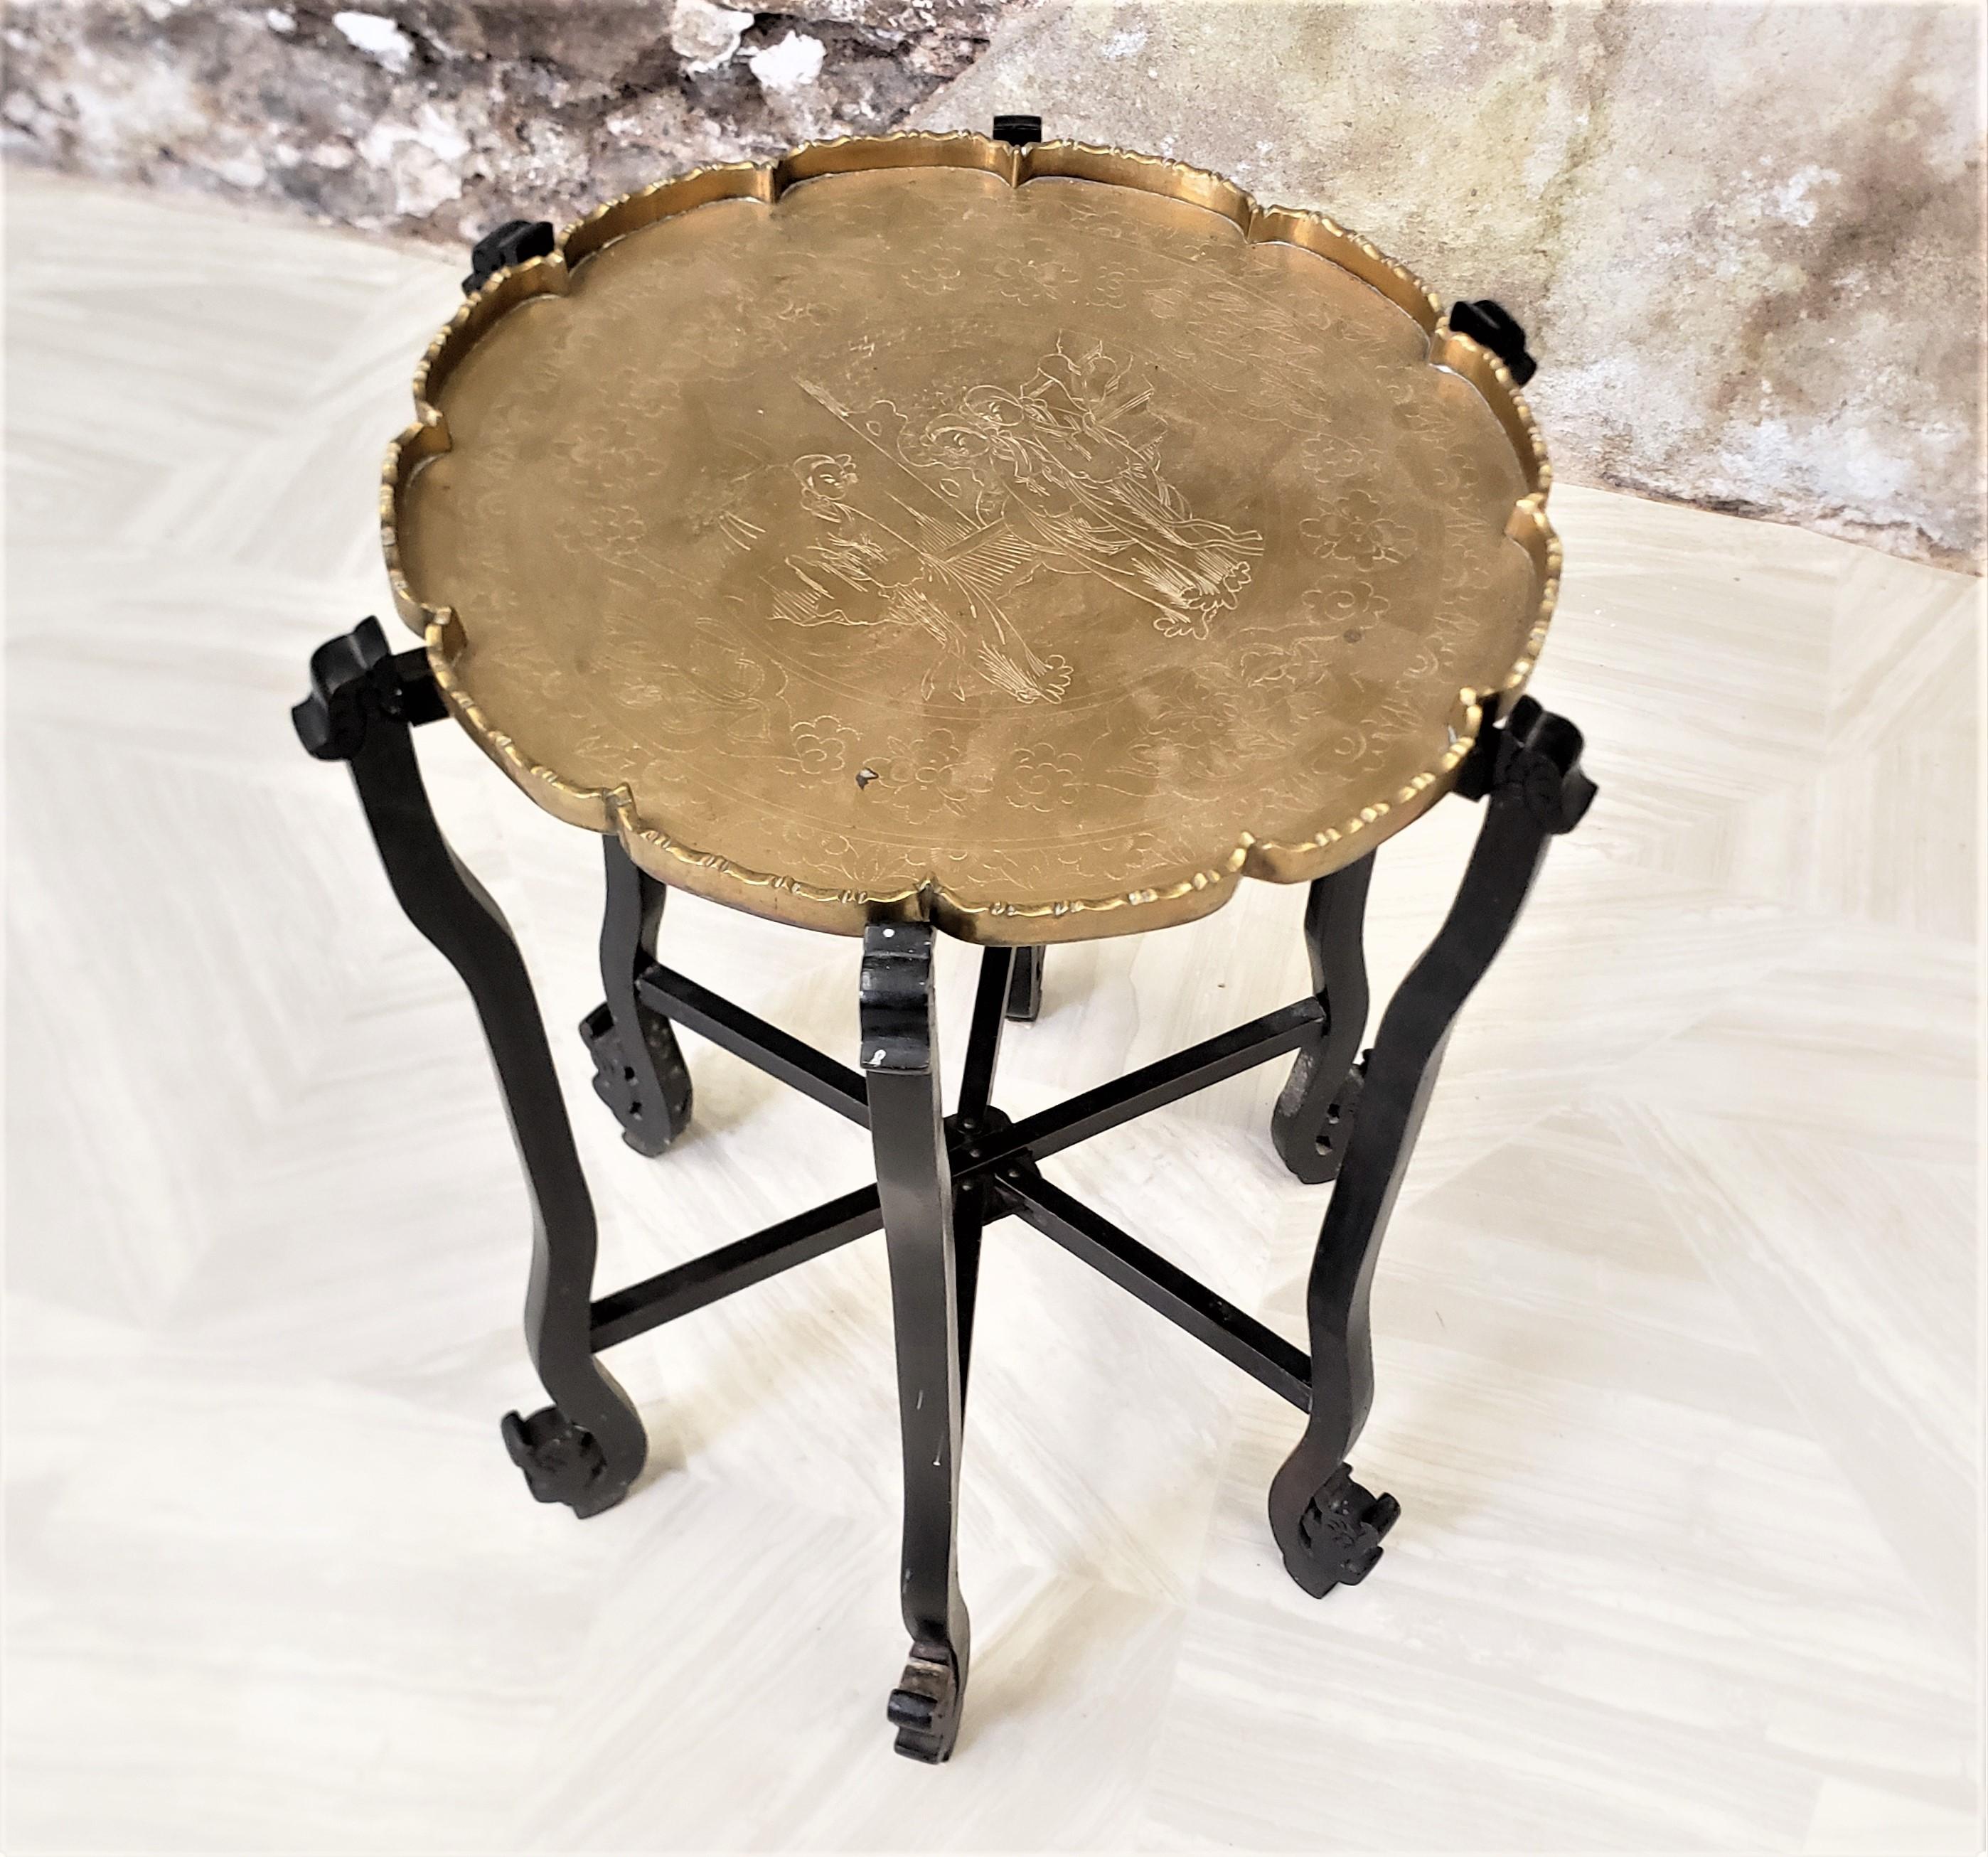 Machine-Made Antique Chinese Brass Tray Folding Table with Engraved Top and Wooden Base For Sale